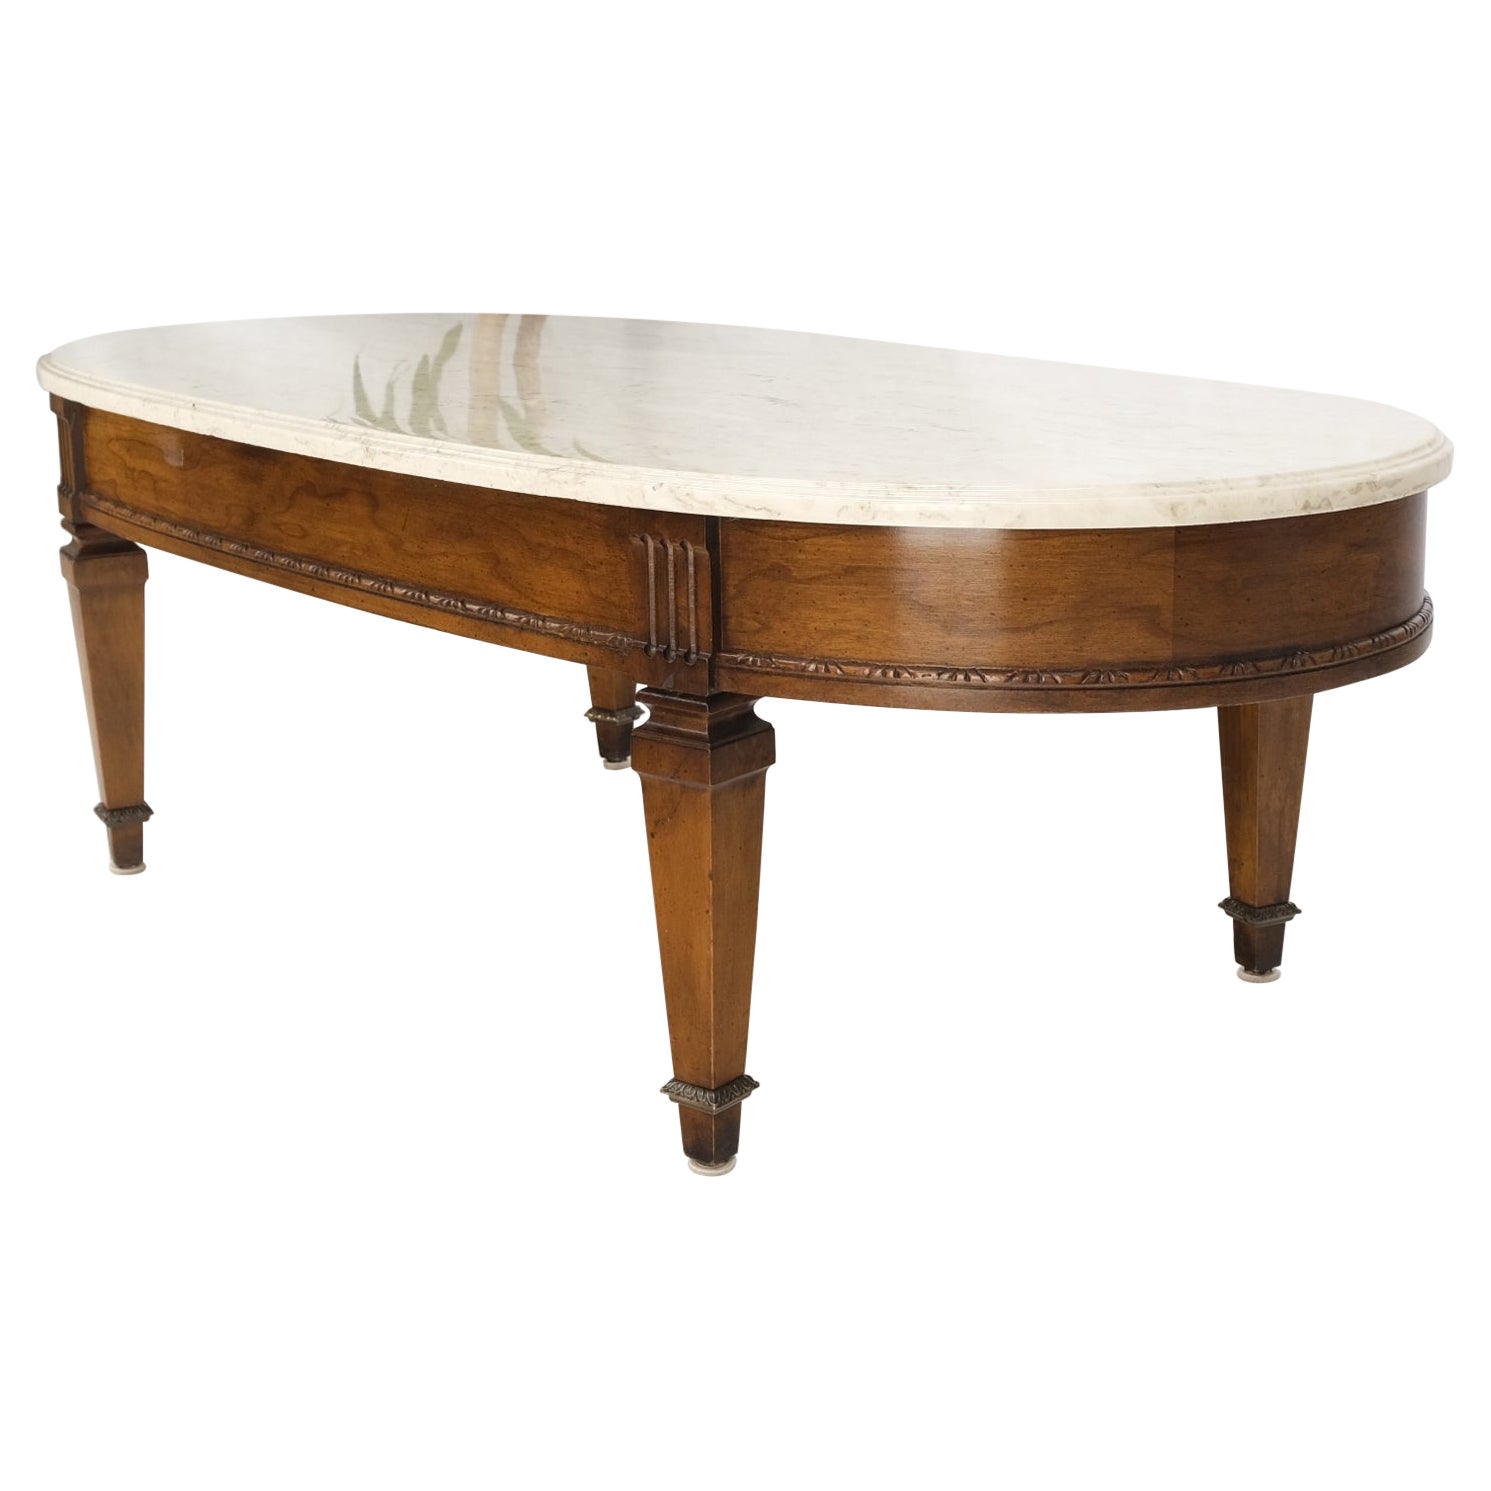 Oval Racetrack Shape Marble Top Mahogany Federal Style Coffee Table